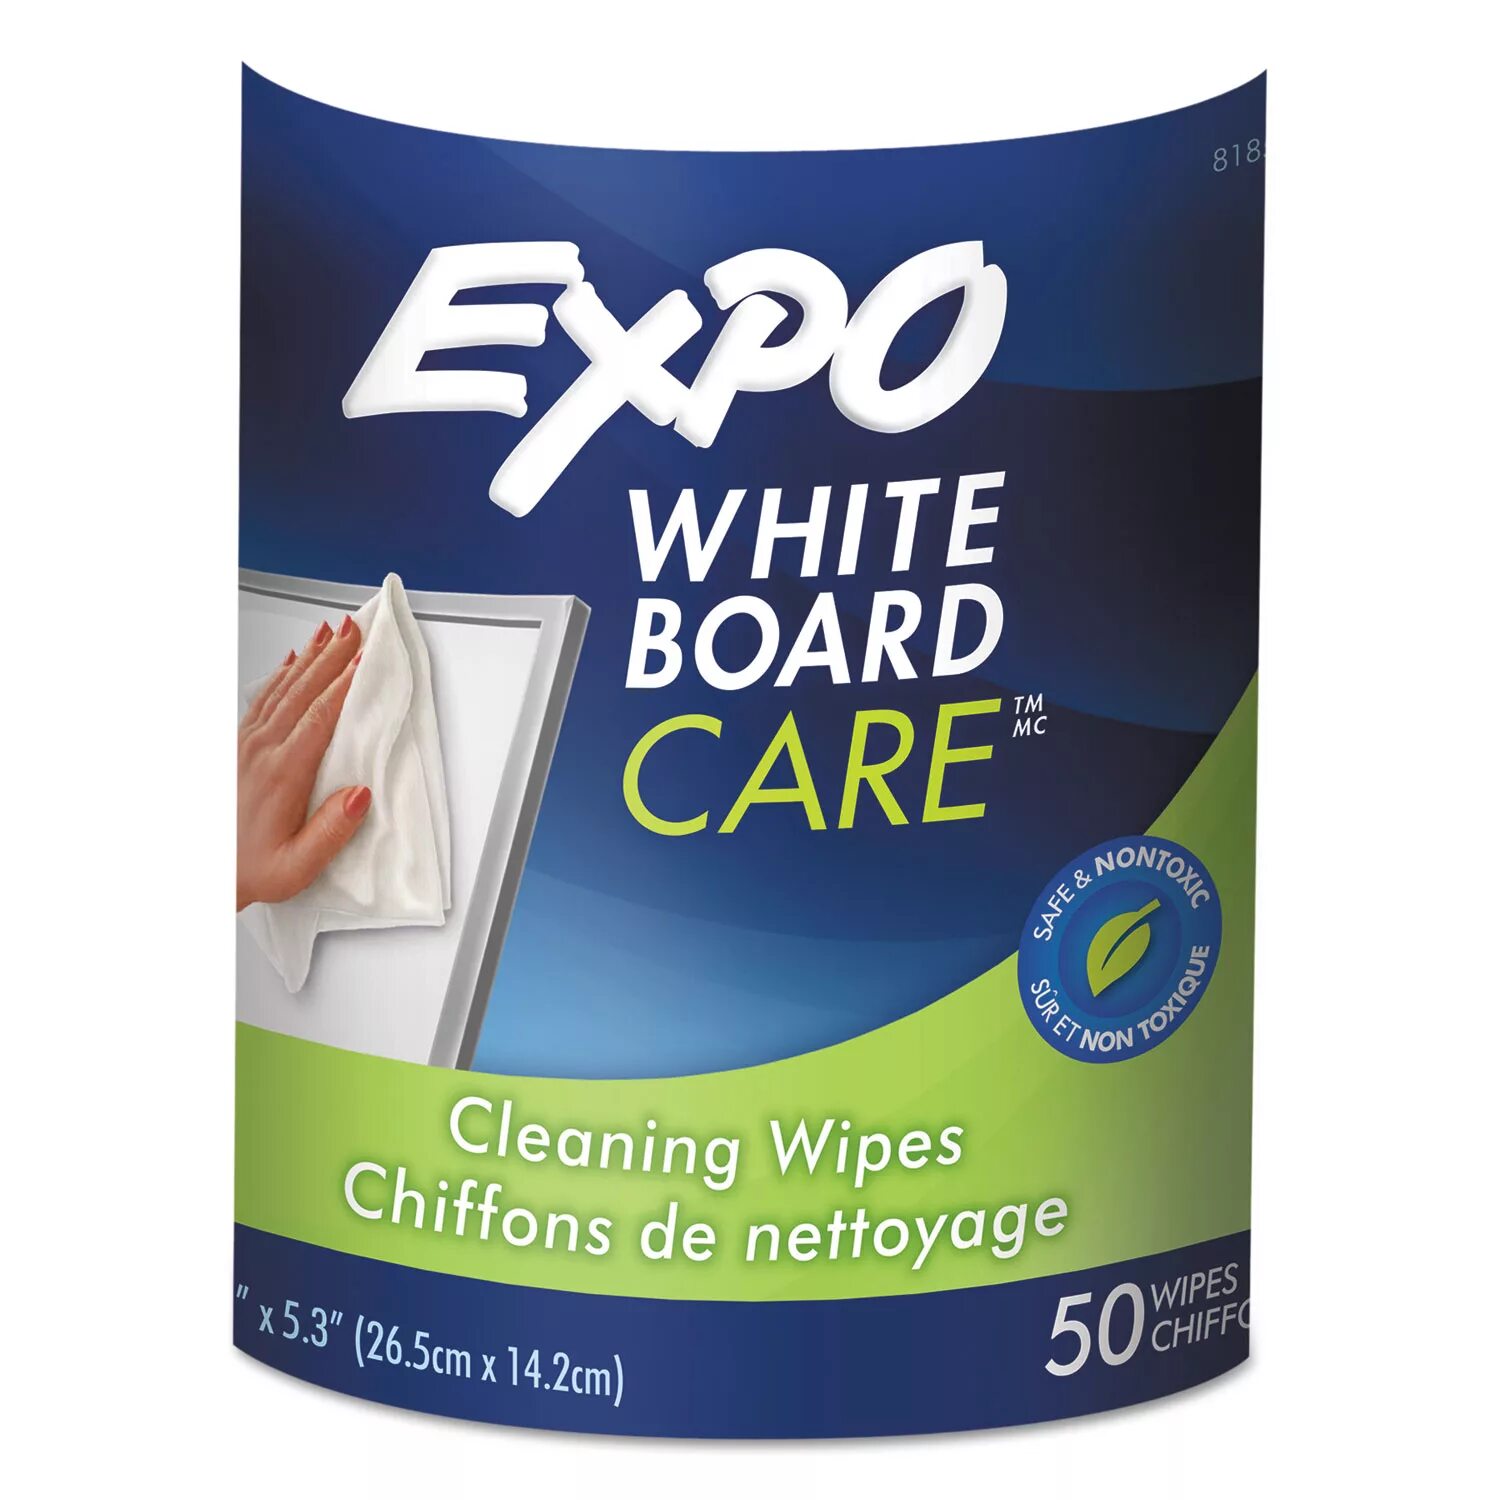 Cleaning wipes. Прокладки clean and clean. Dry wipe Boards. Clean the Board.